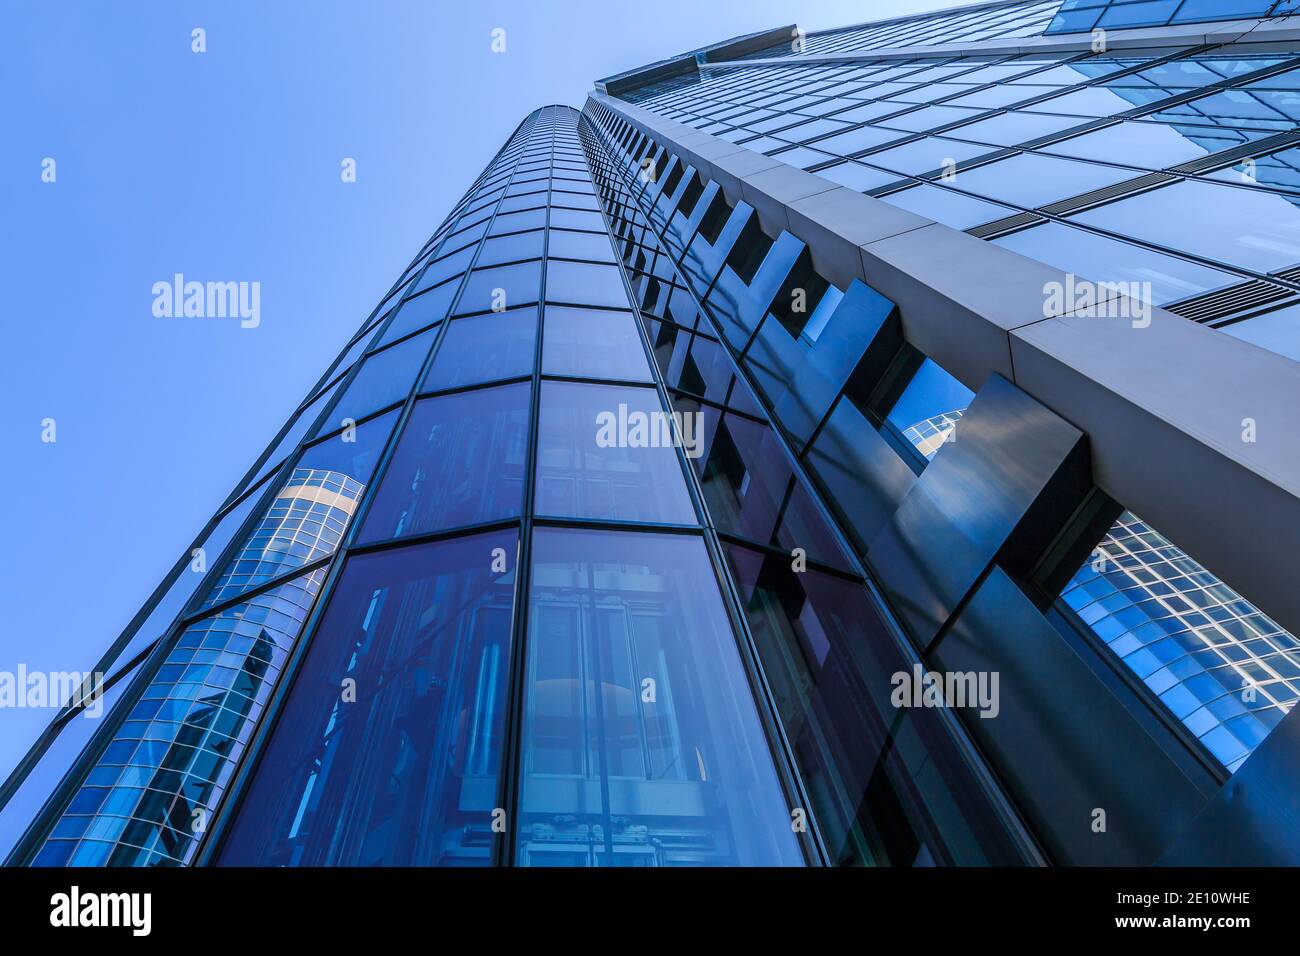 Glass facade of a high-rise in Frankfurt. View along one of a skyscraper with reflections in the windows. House of the finance and business district w Stock Photo